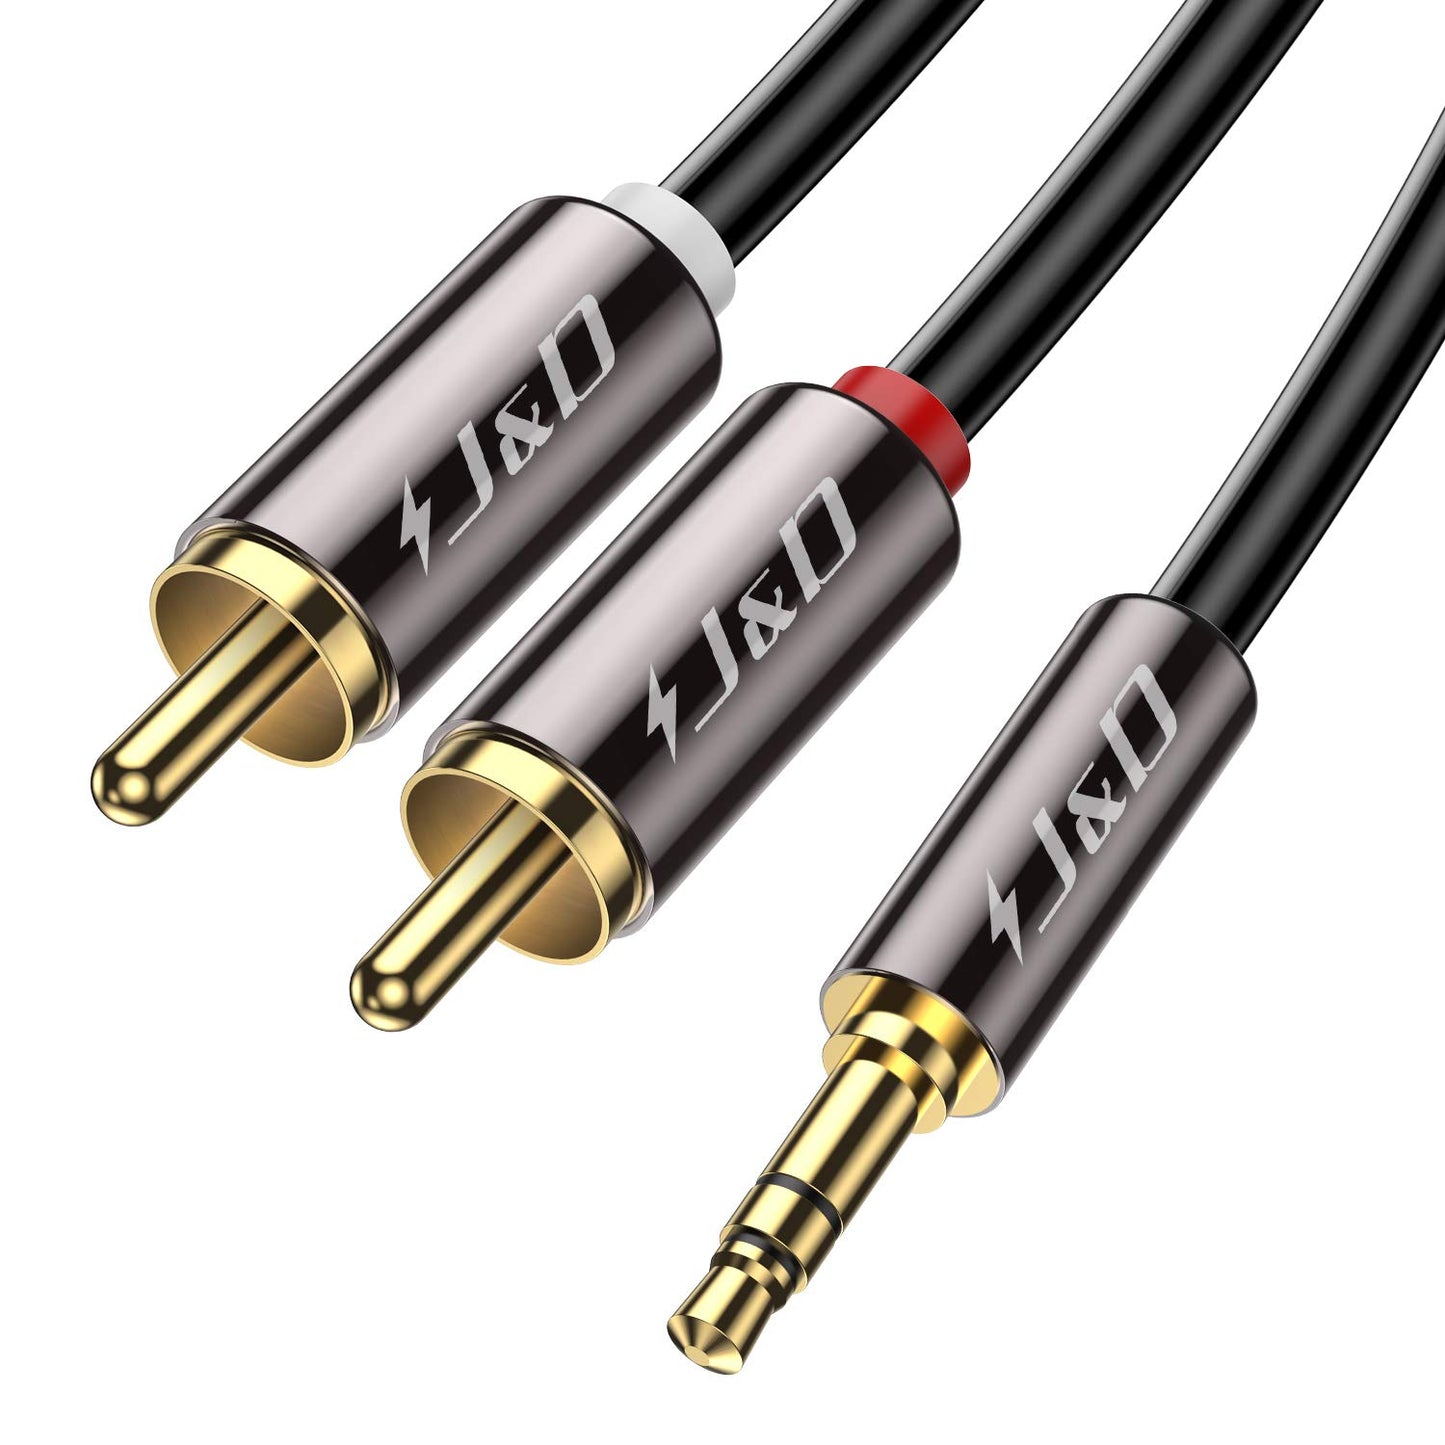 audio cable from J&D Tech